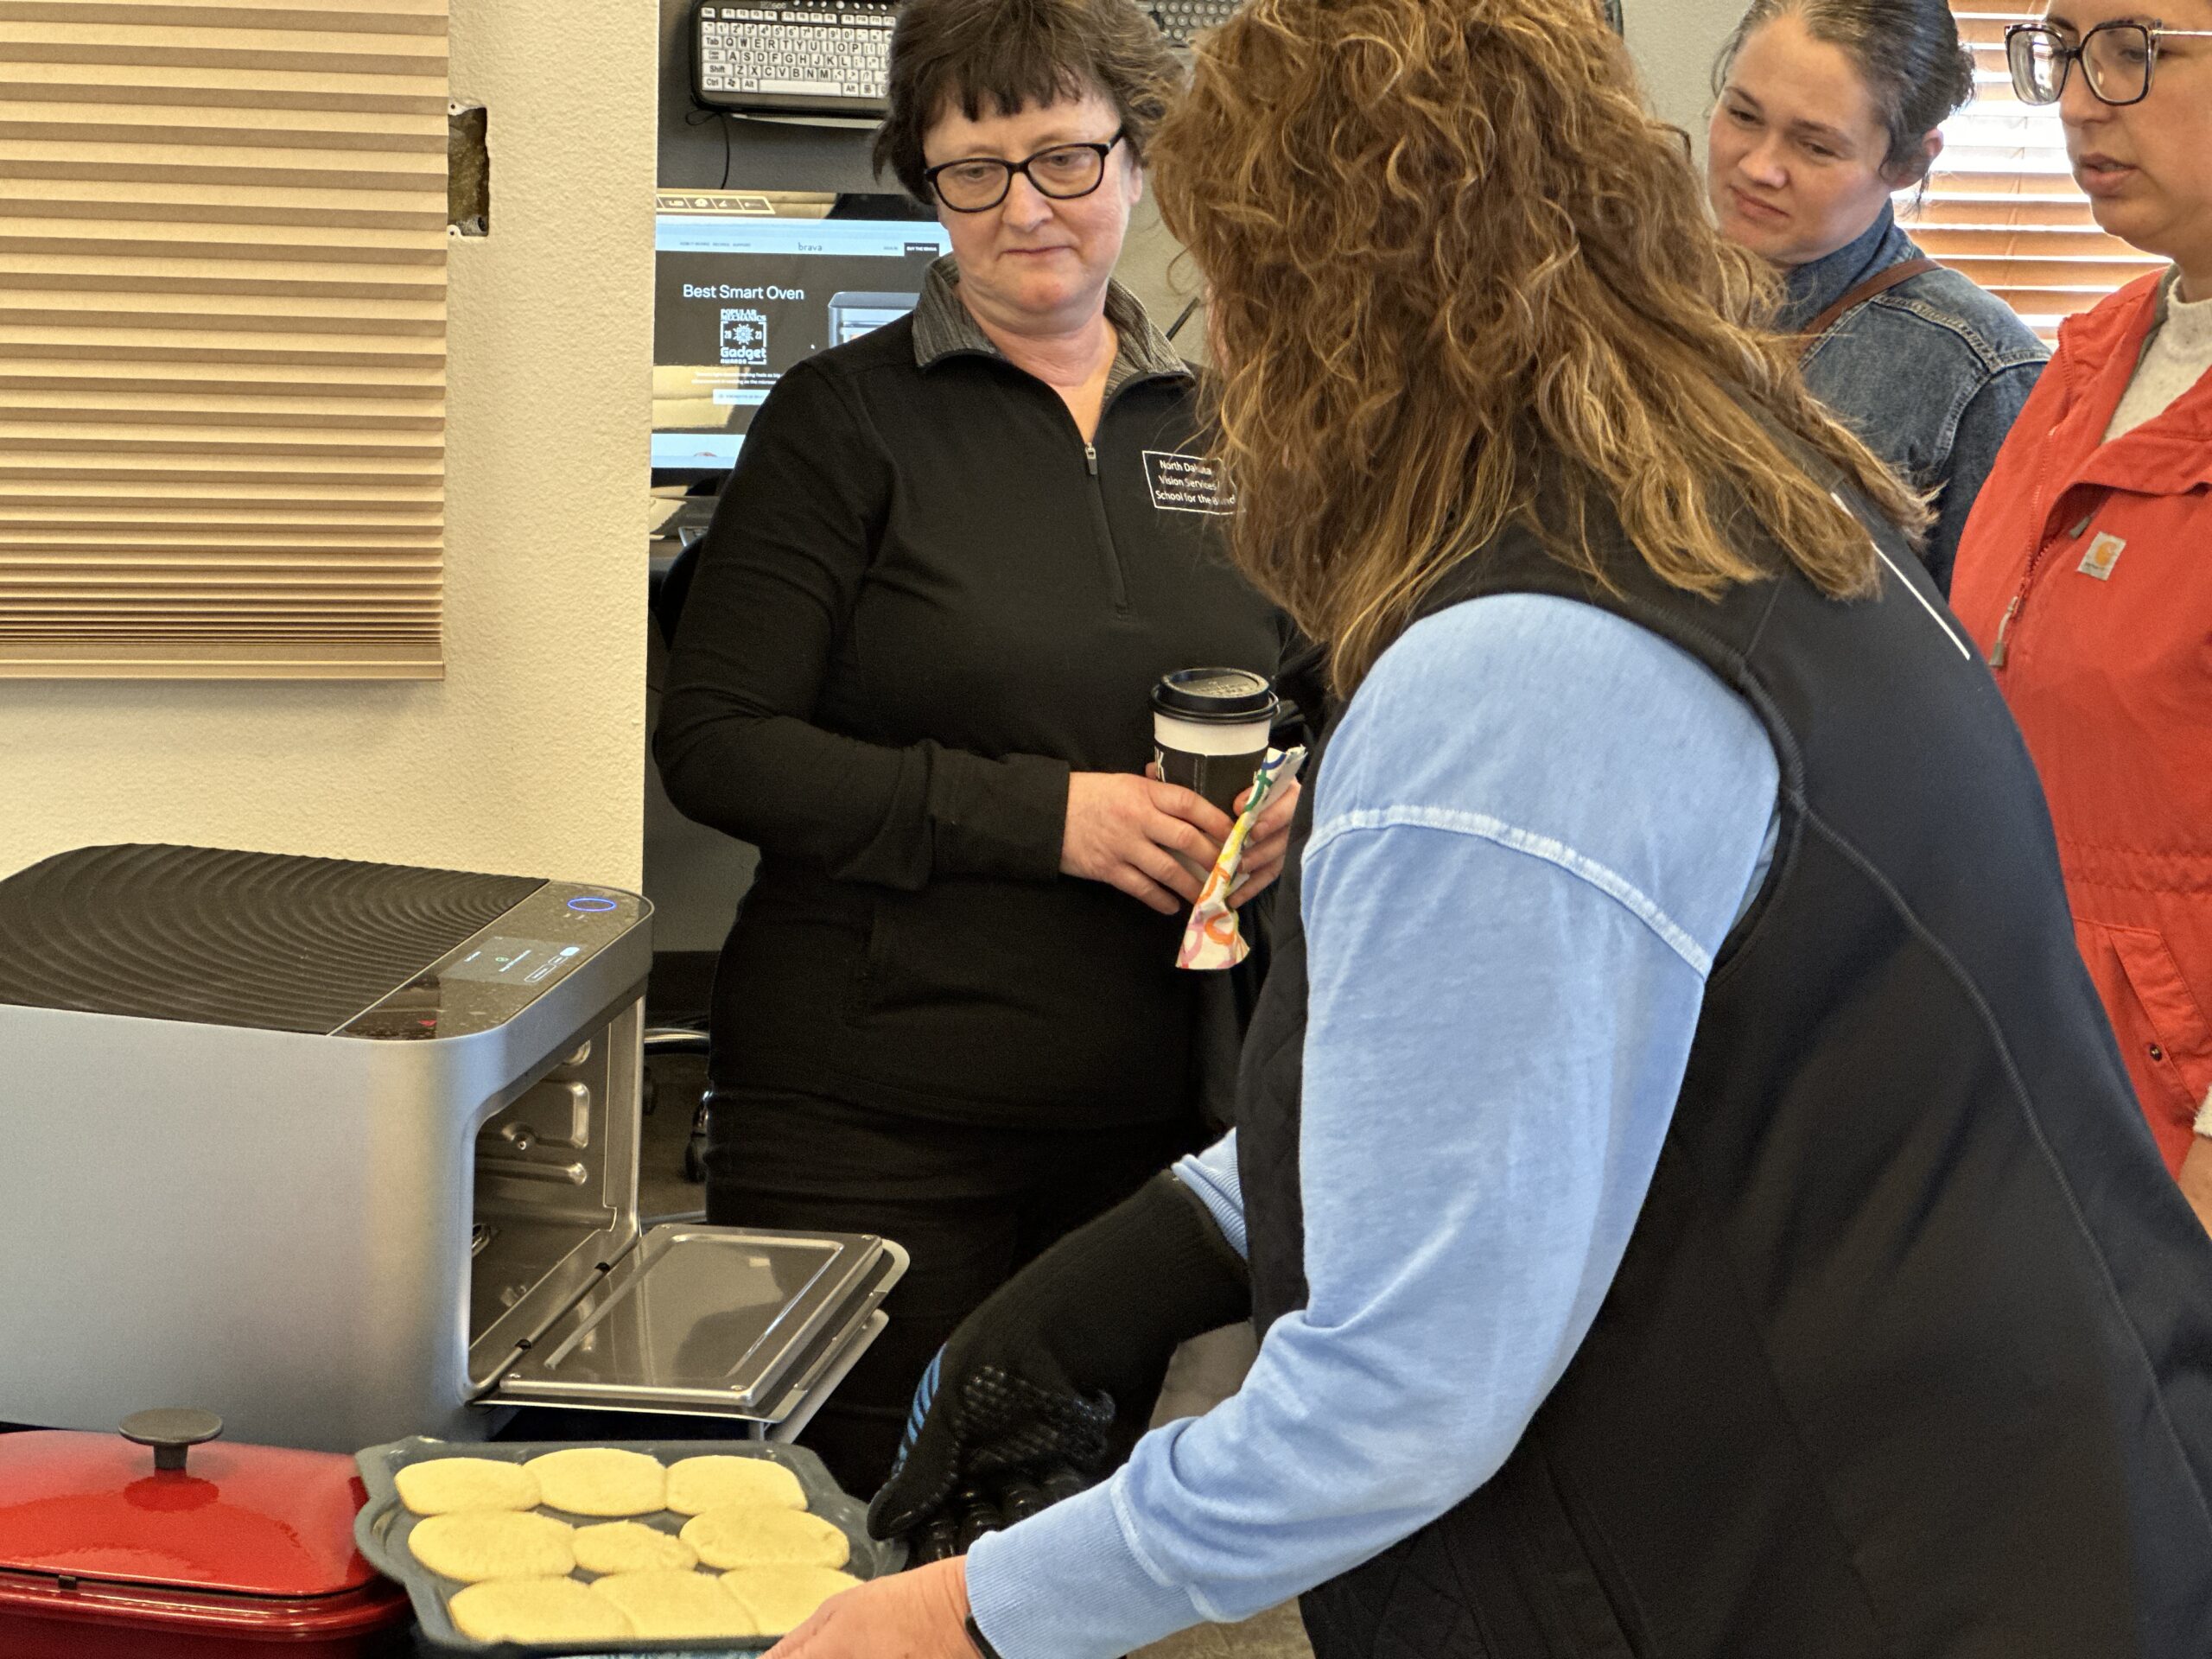 AT Technician Krista Burman demonstrates a Brava smart oven by baking cookies at our open house.